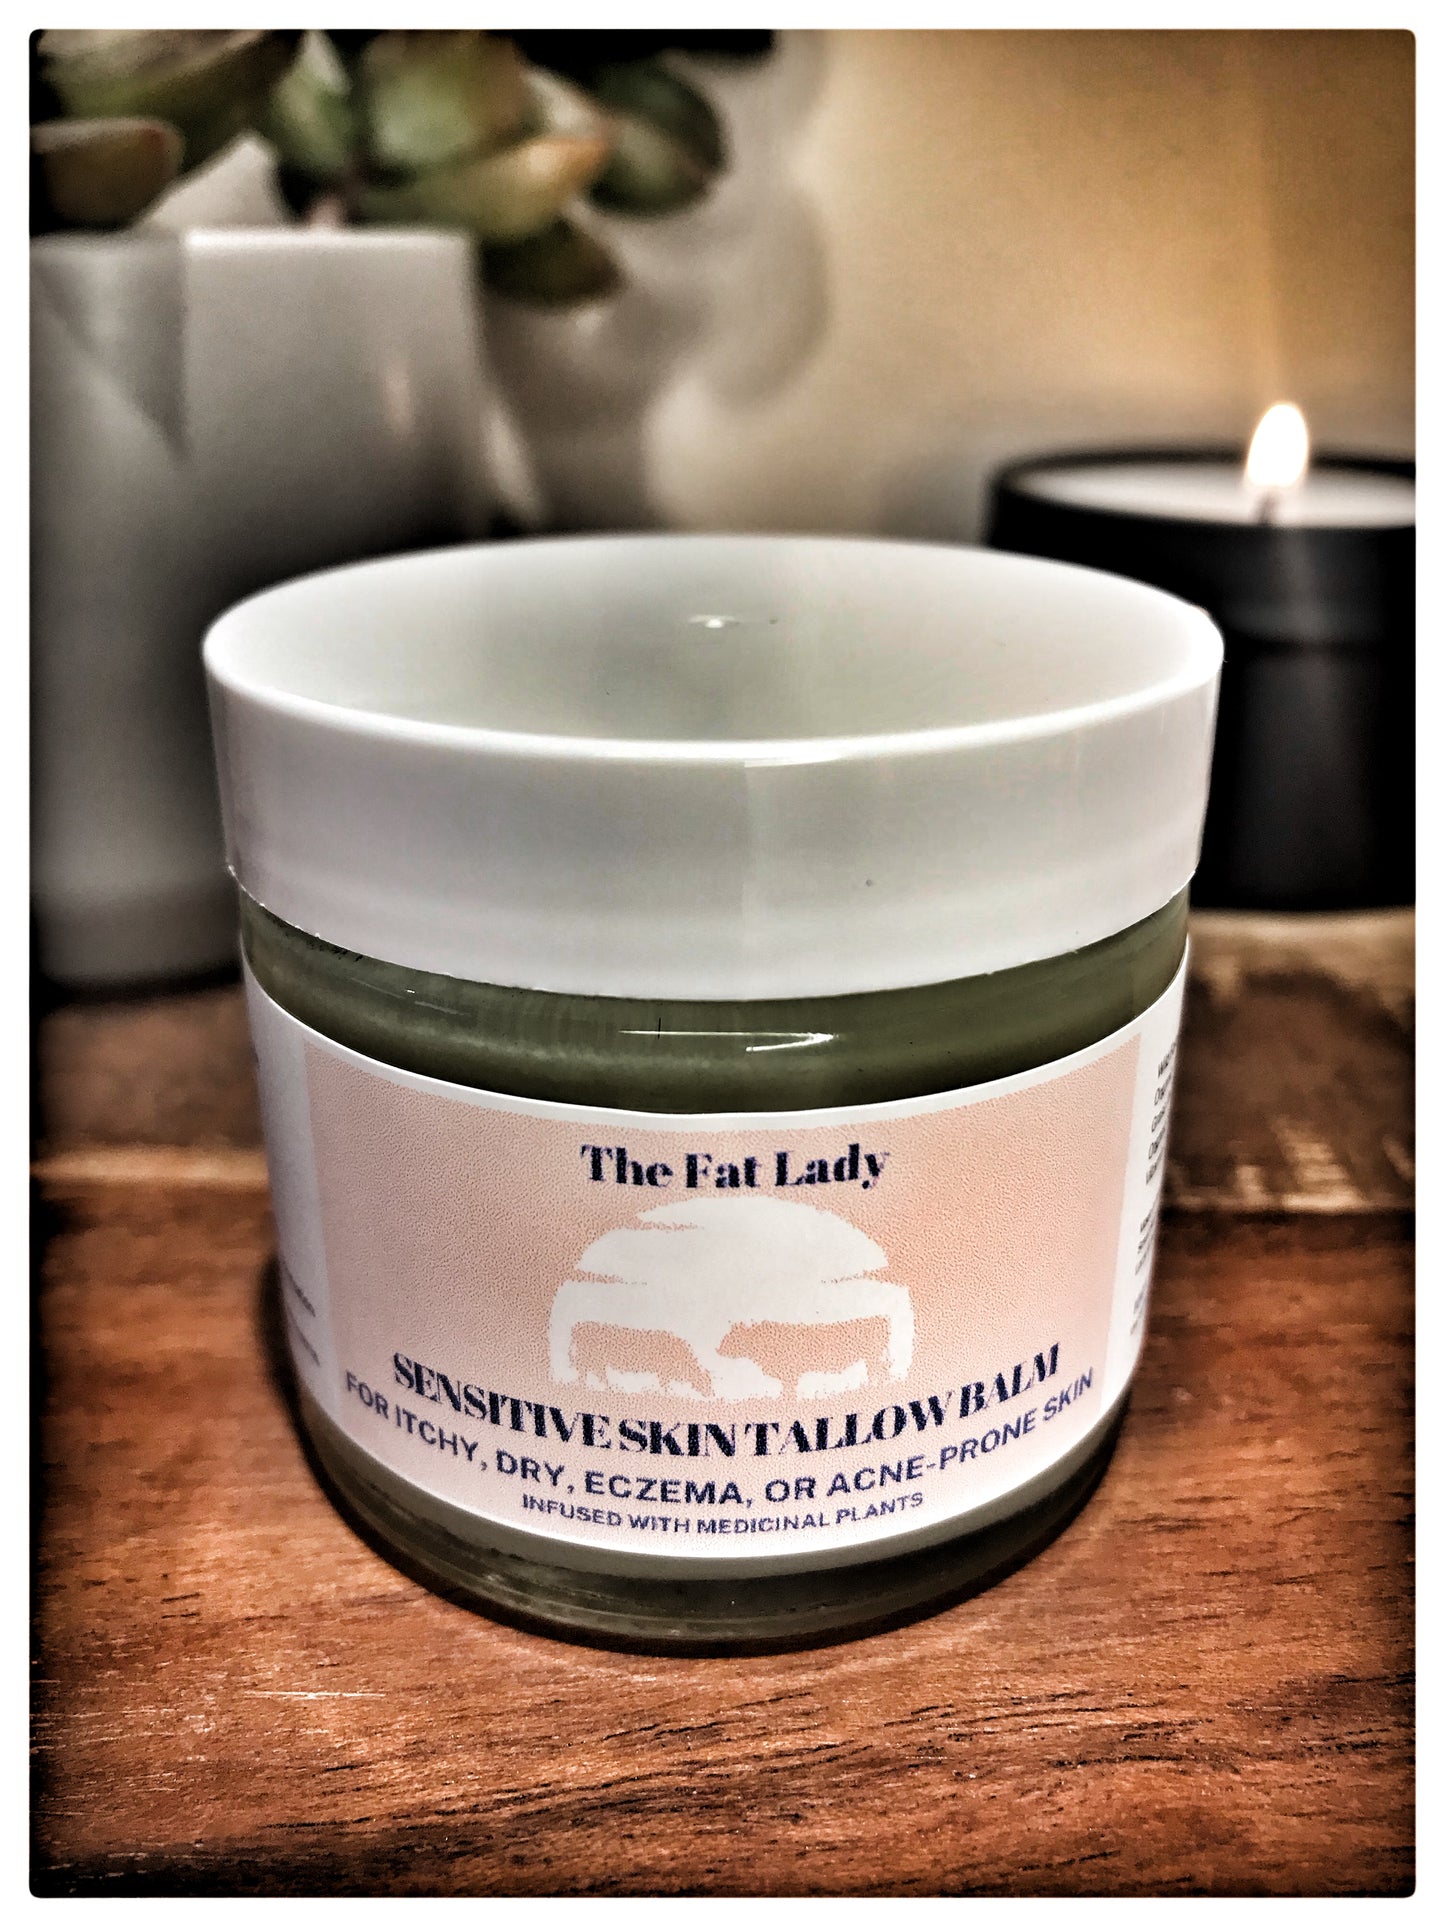 Acne-prone, Eczema and Sensitive Skin Tallow Balm With wildcrafted herbs. Free of Seed Oils. Unscented & Natural- 2 Oz